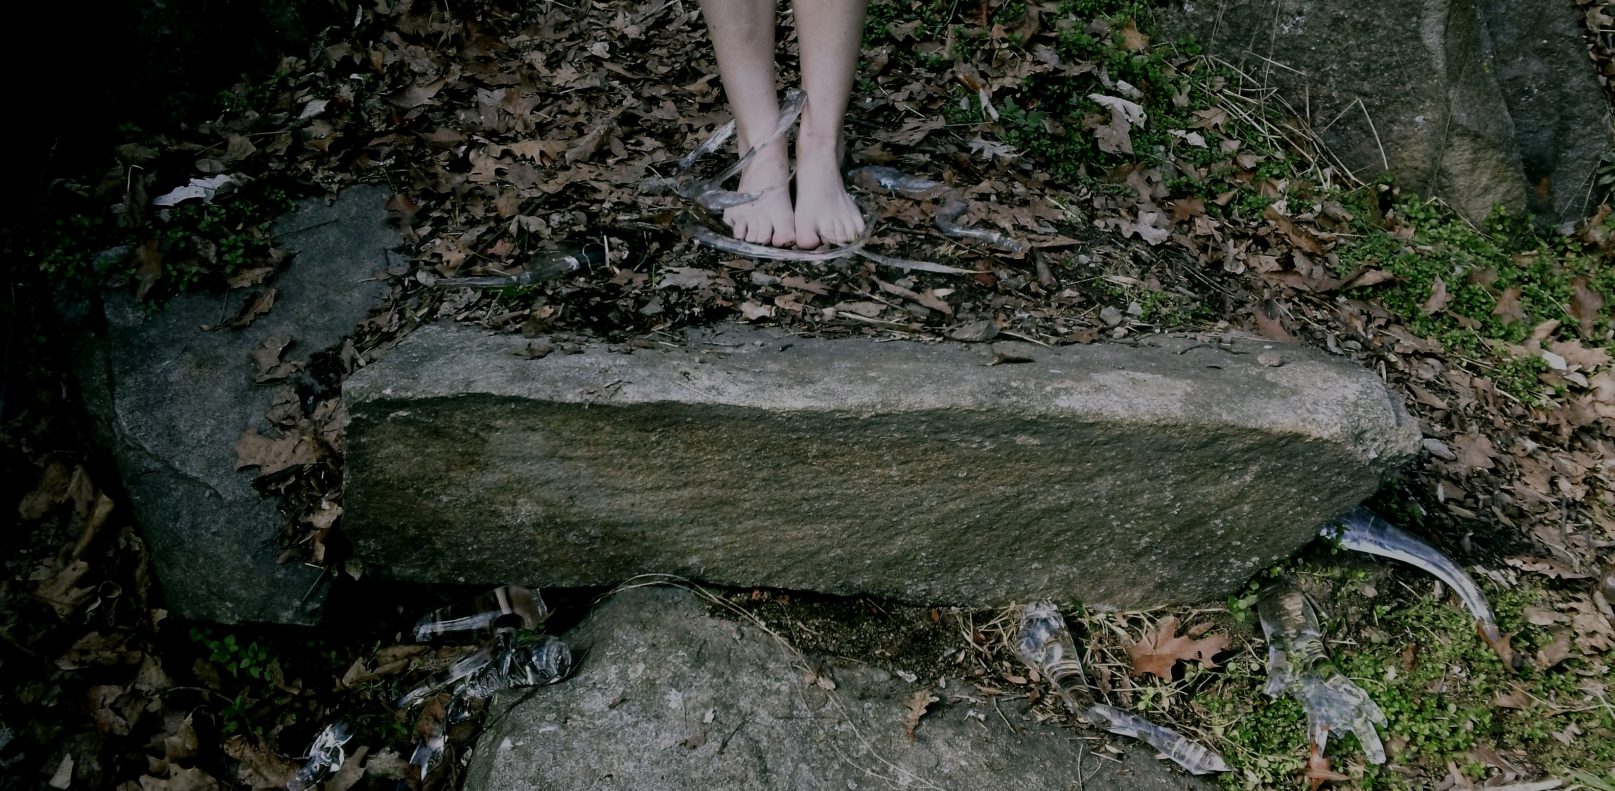 "Treedom" is a series of photographs depicting roots gathering up a woman's legs. This series represents the idea of escaping and "planting oneself" in solitude, particularly within nature.